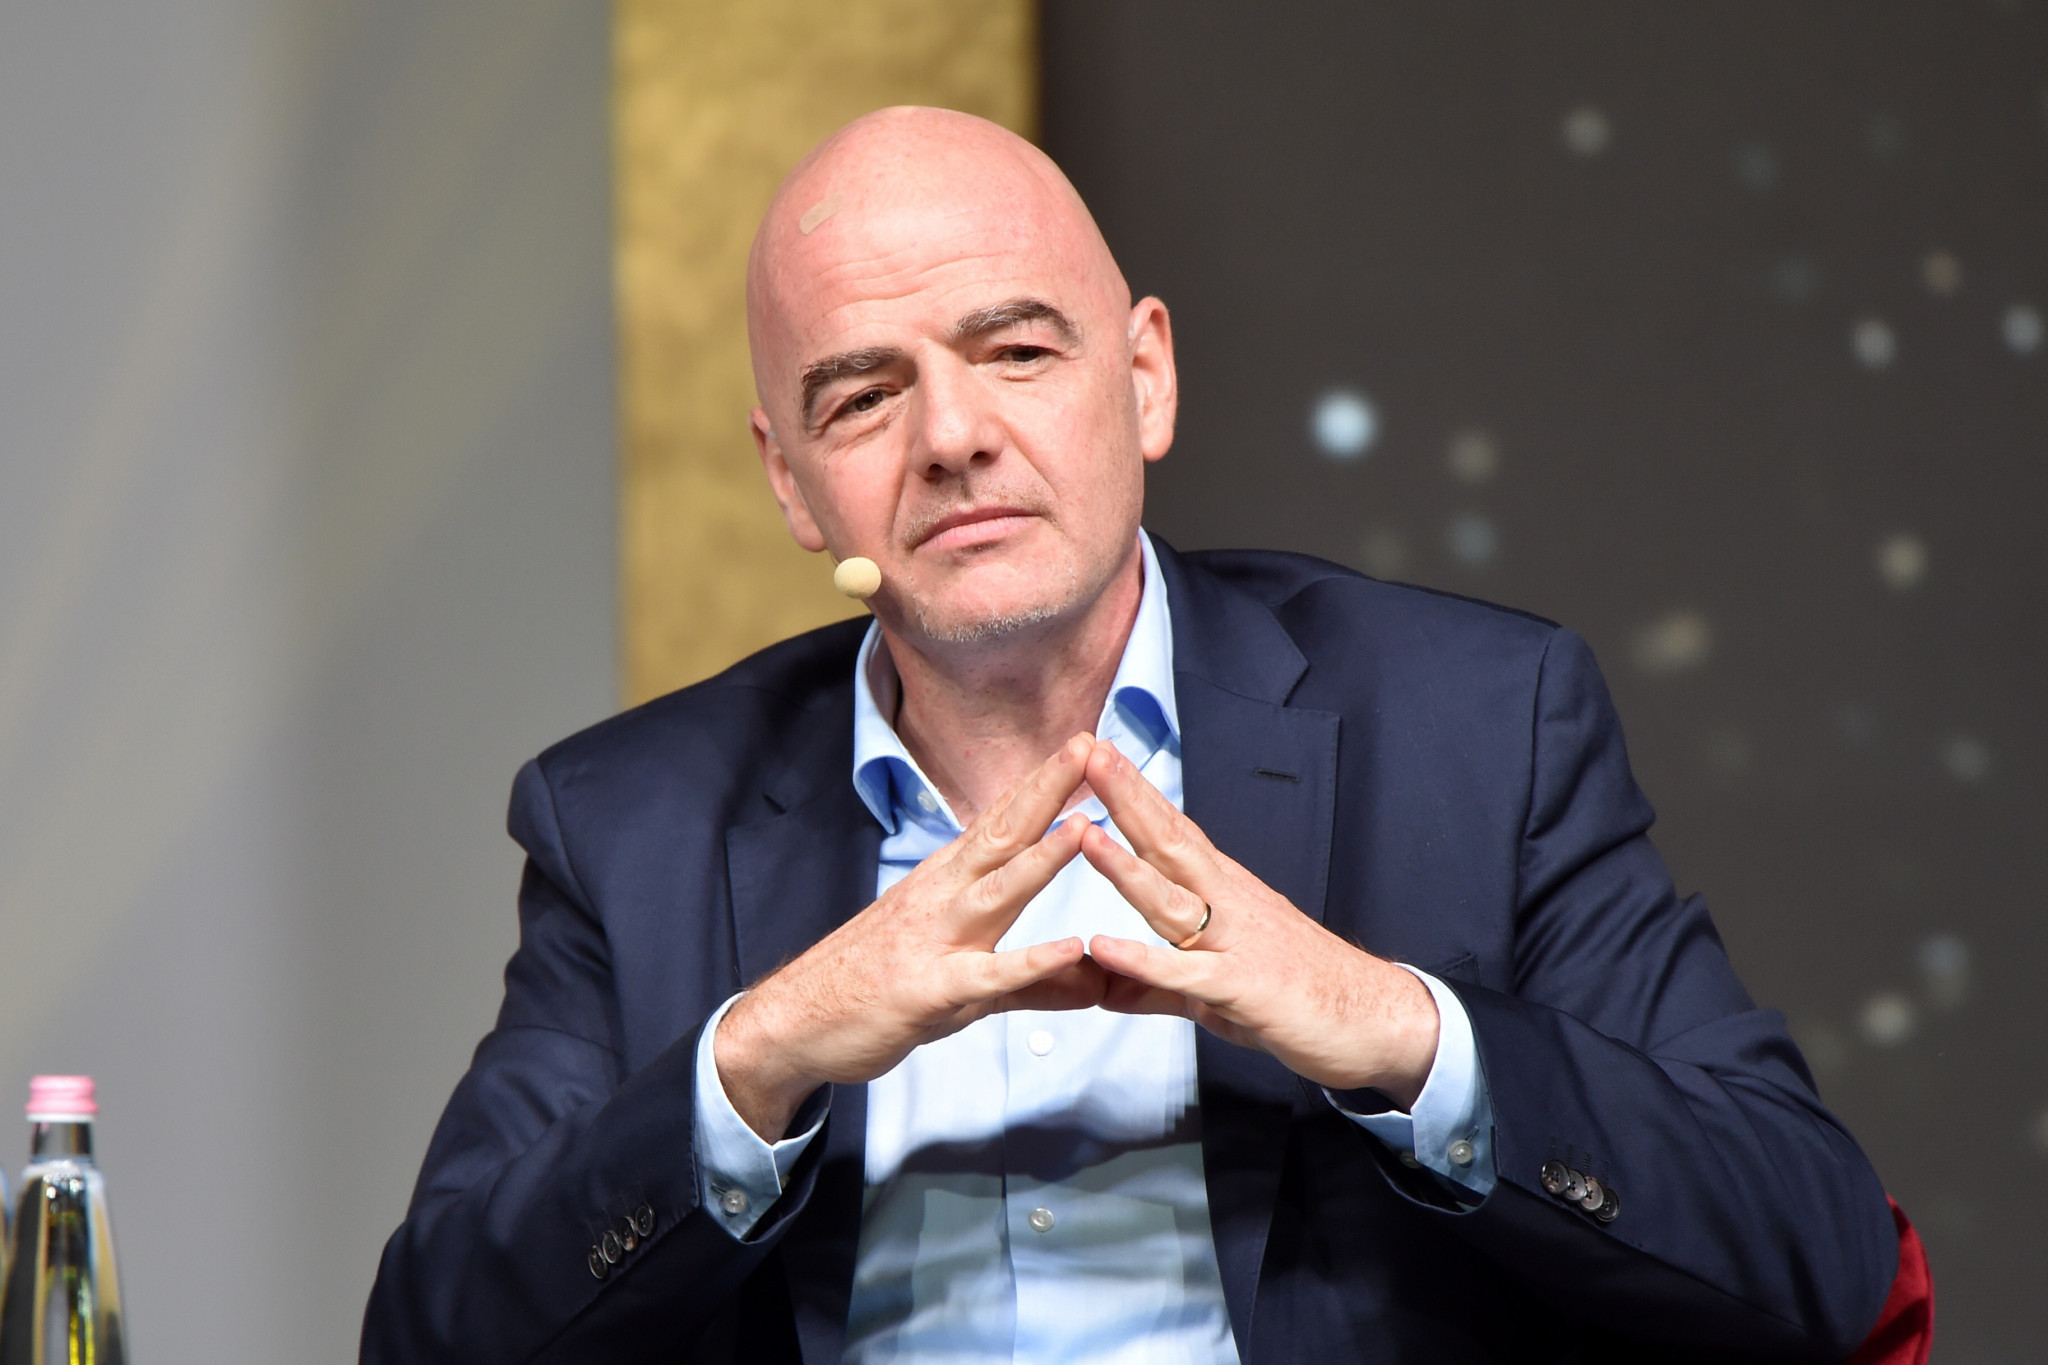 Gianni Infantino has denied any wrongdoing over his meetings with Michael Lauber ©Getty Images